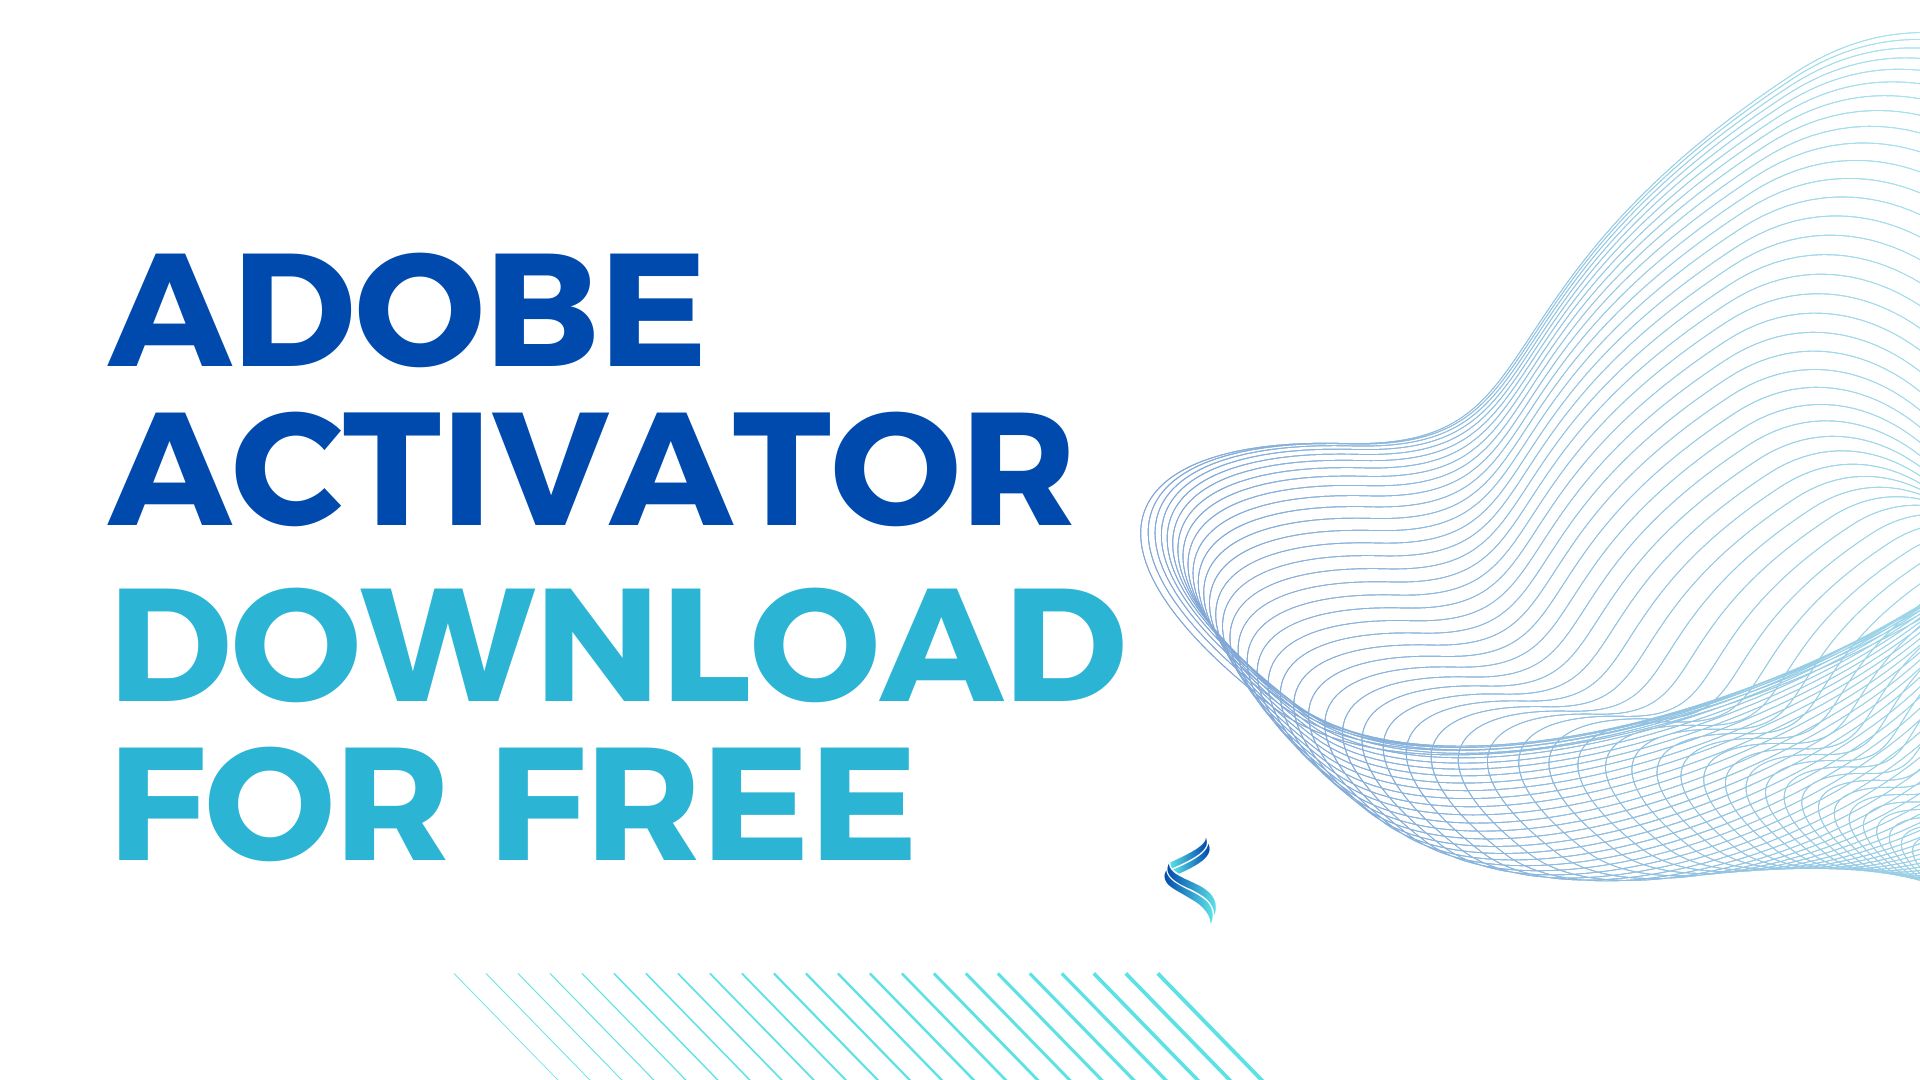 Adobe Activator Download for Free